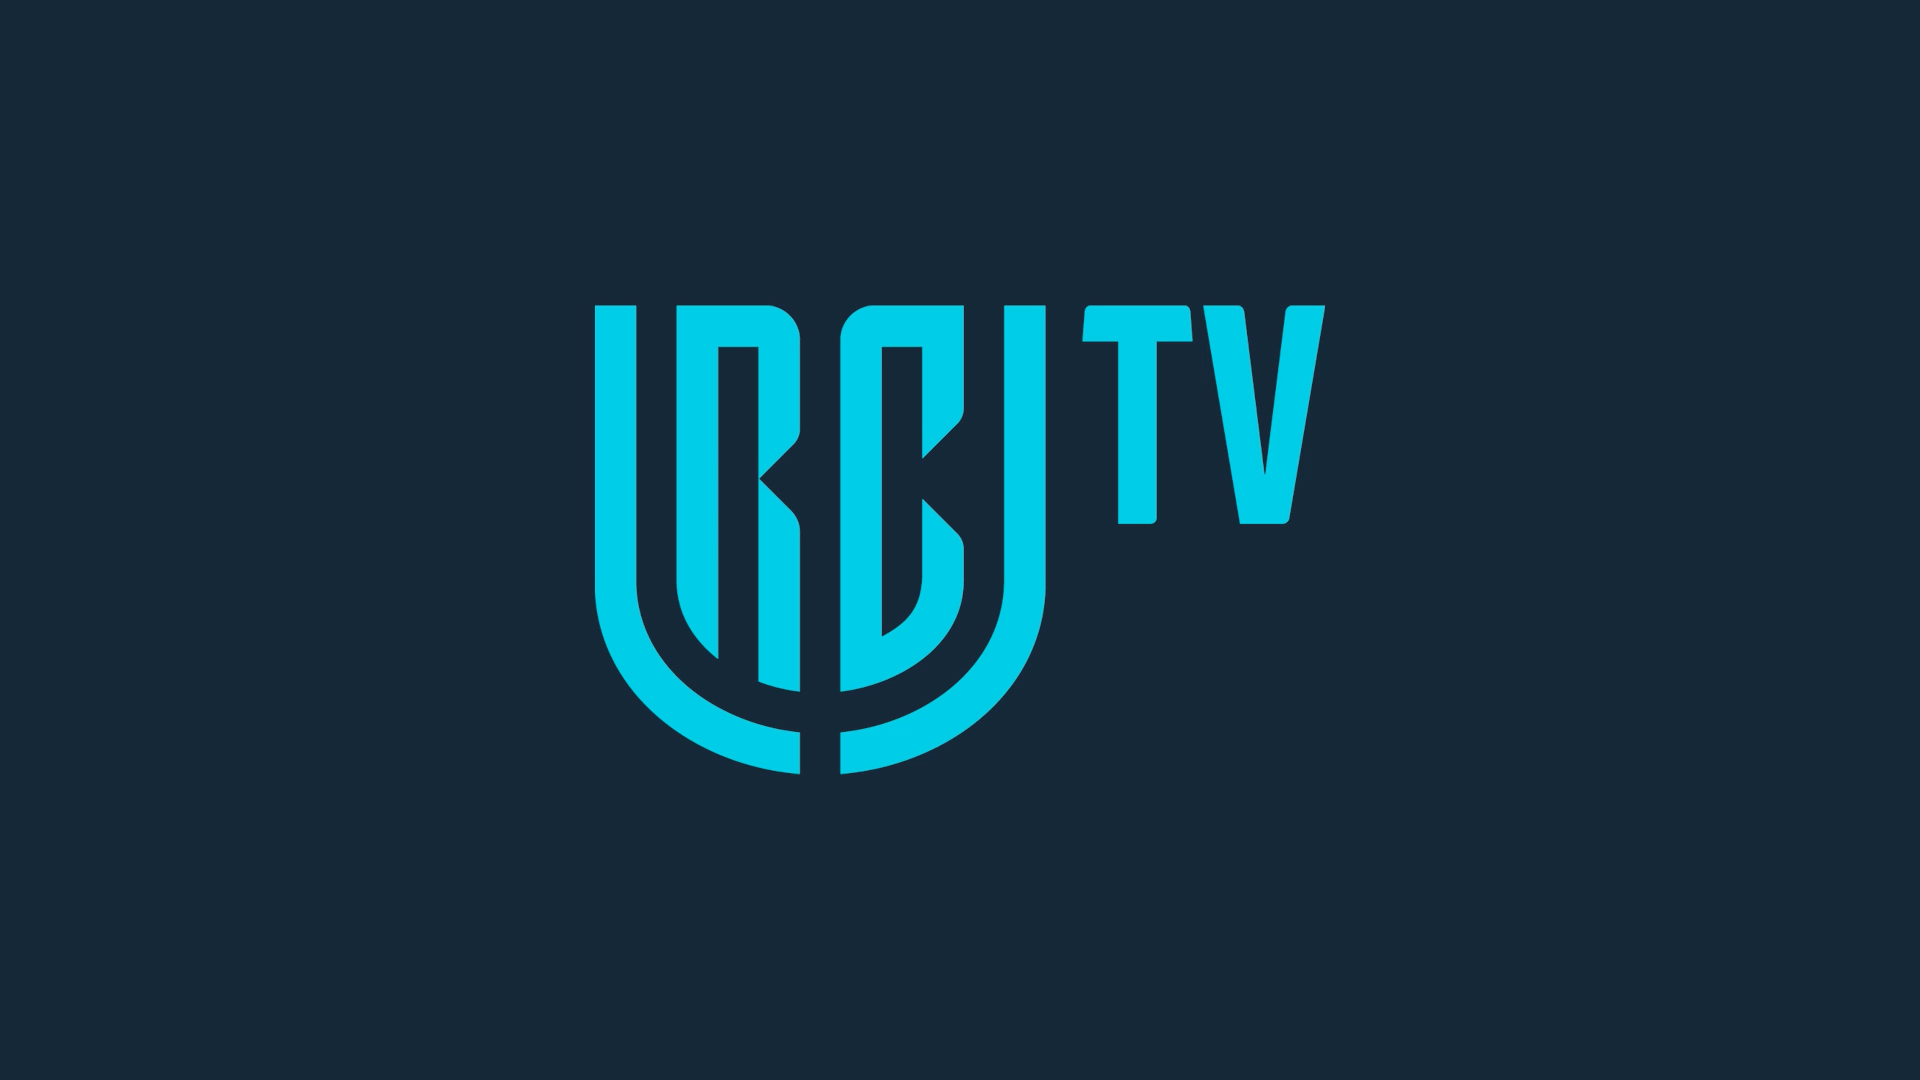 United Rugby Championship and RTE tie up to launch URC TV